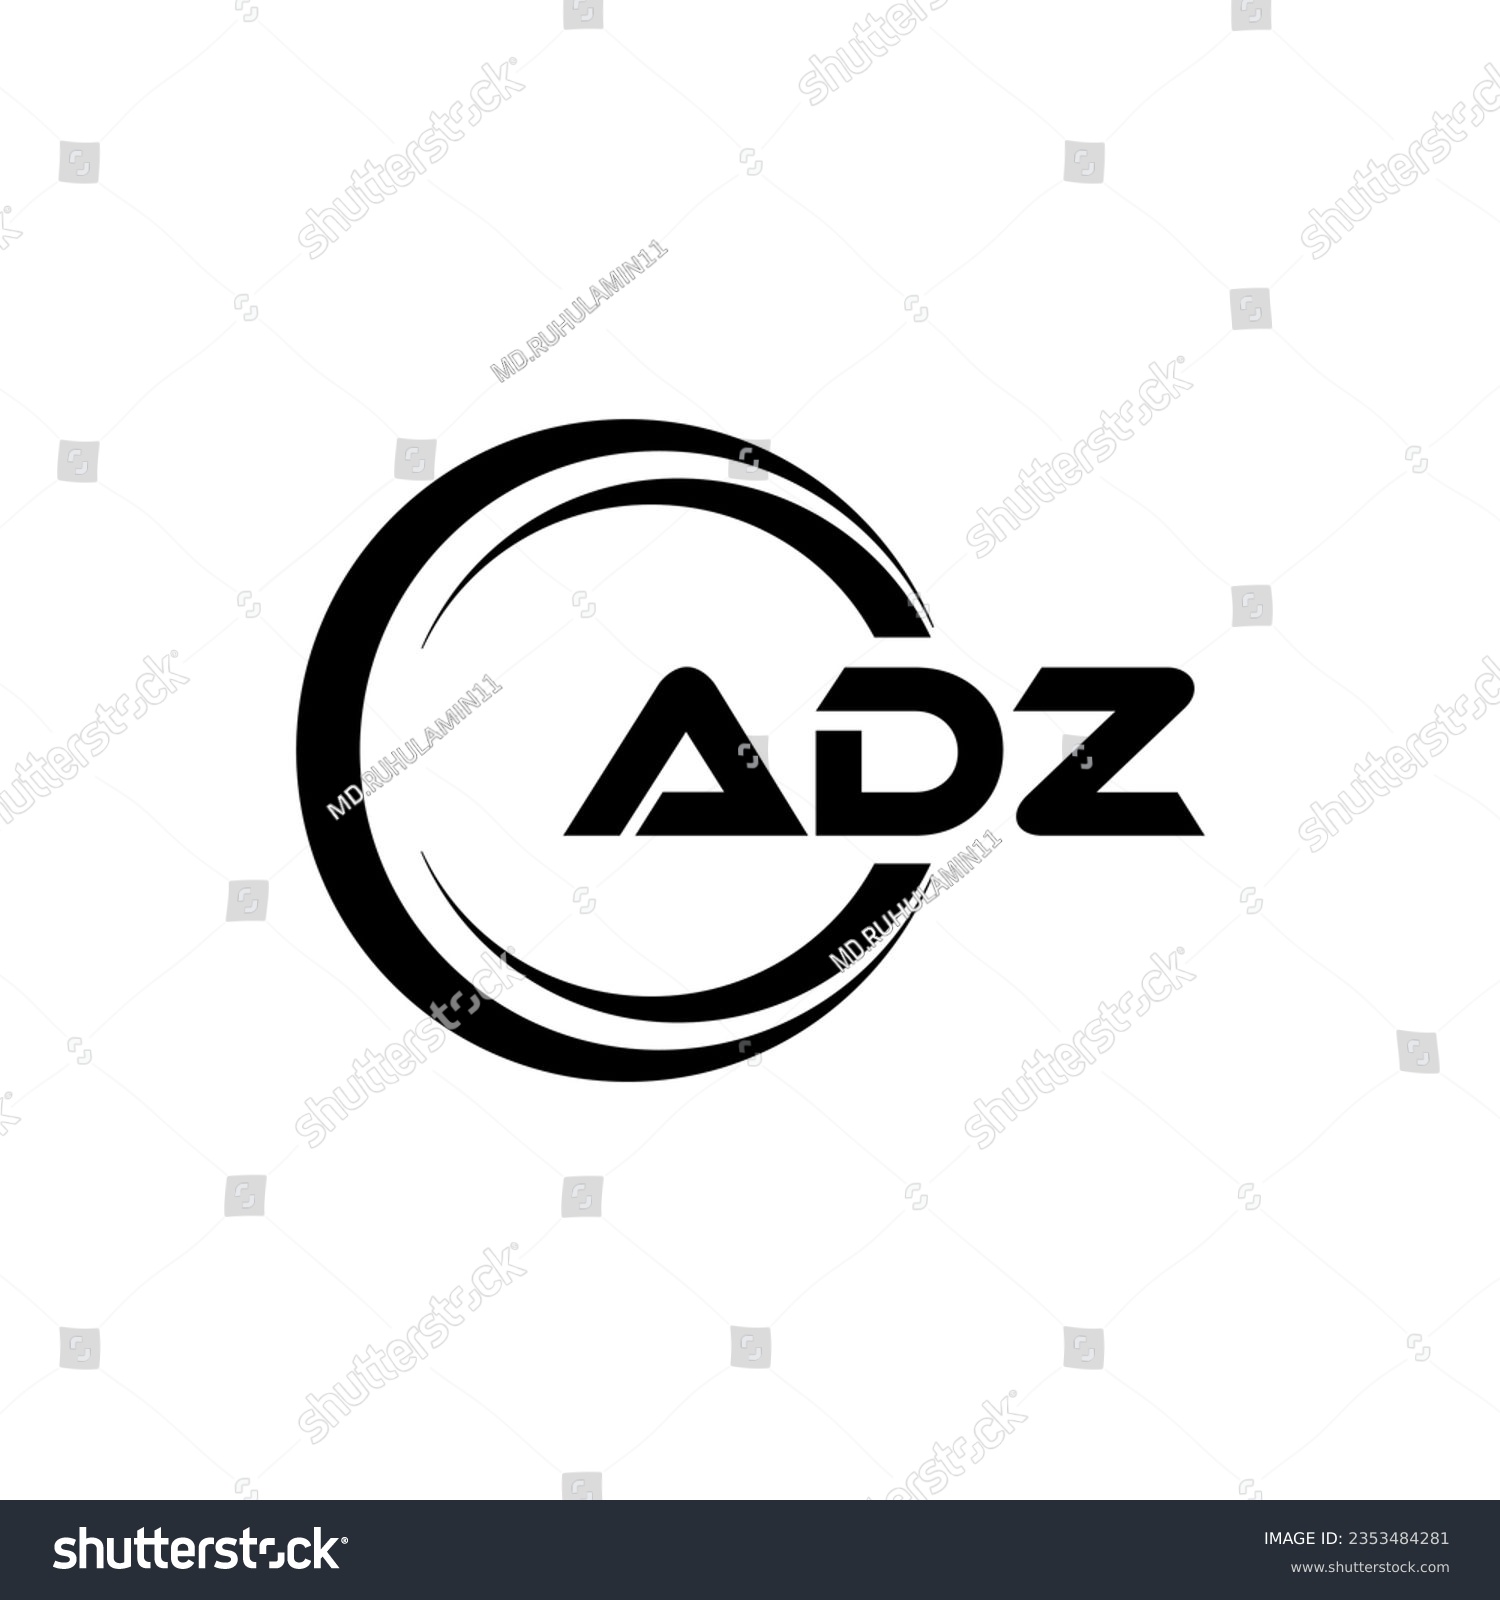 SVG of ADZ Logo Design, Inspiration for a Unique Identity. Modern Elegance and Creative Design. Watermark Your Success with the Striking this Logo. svg